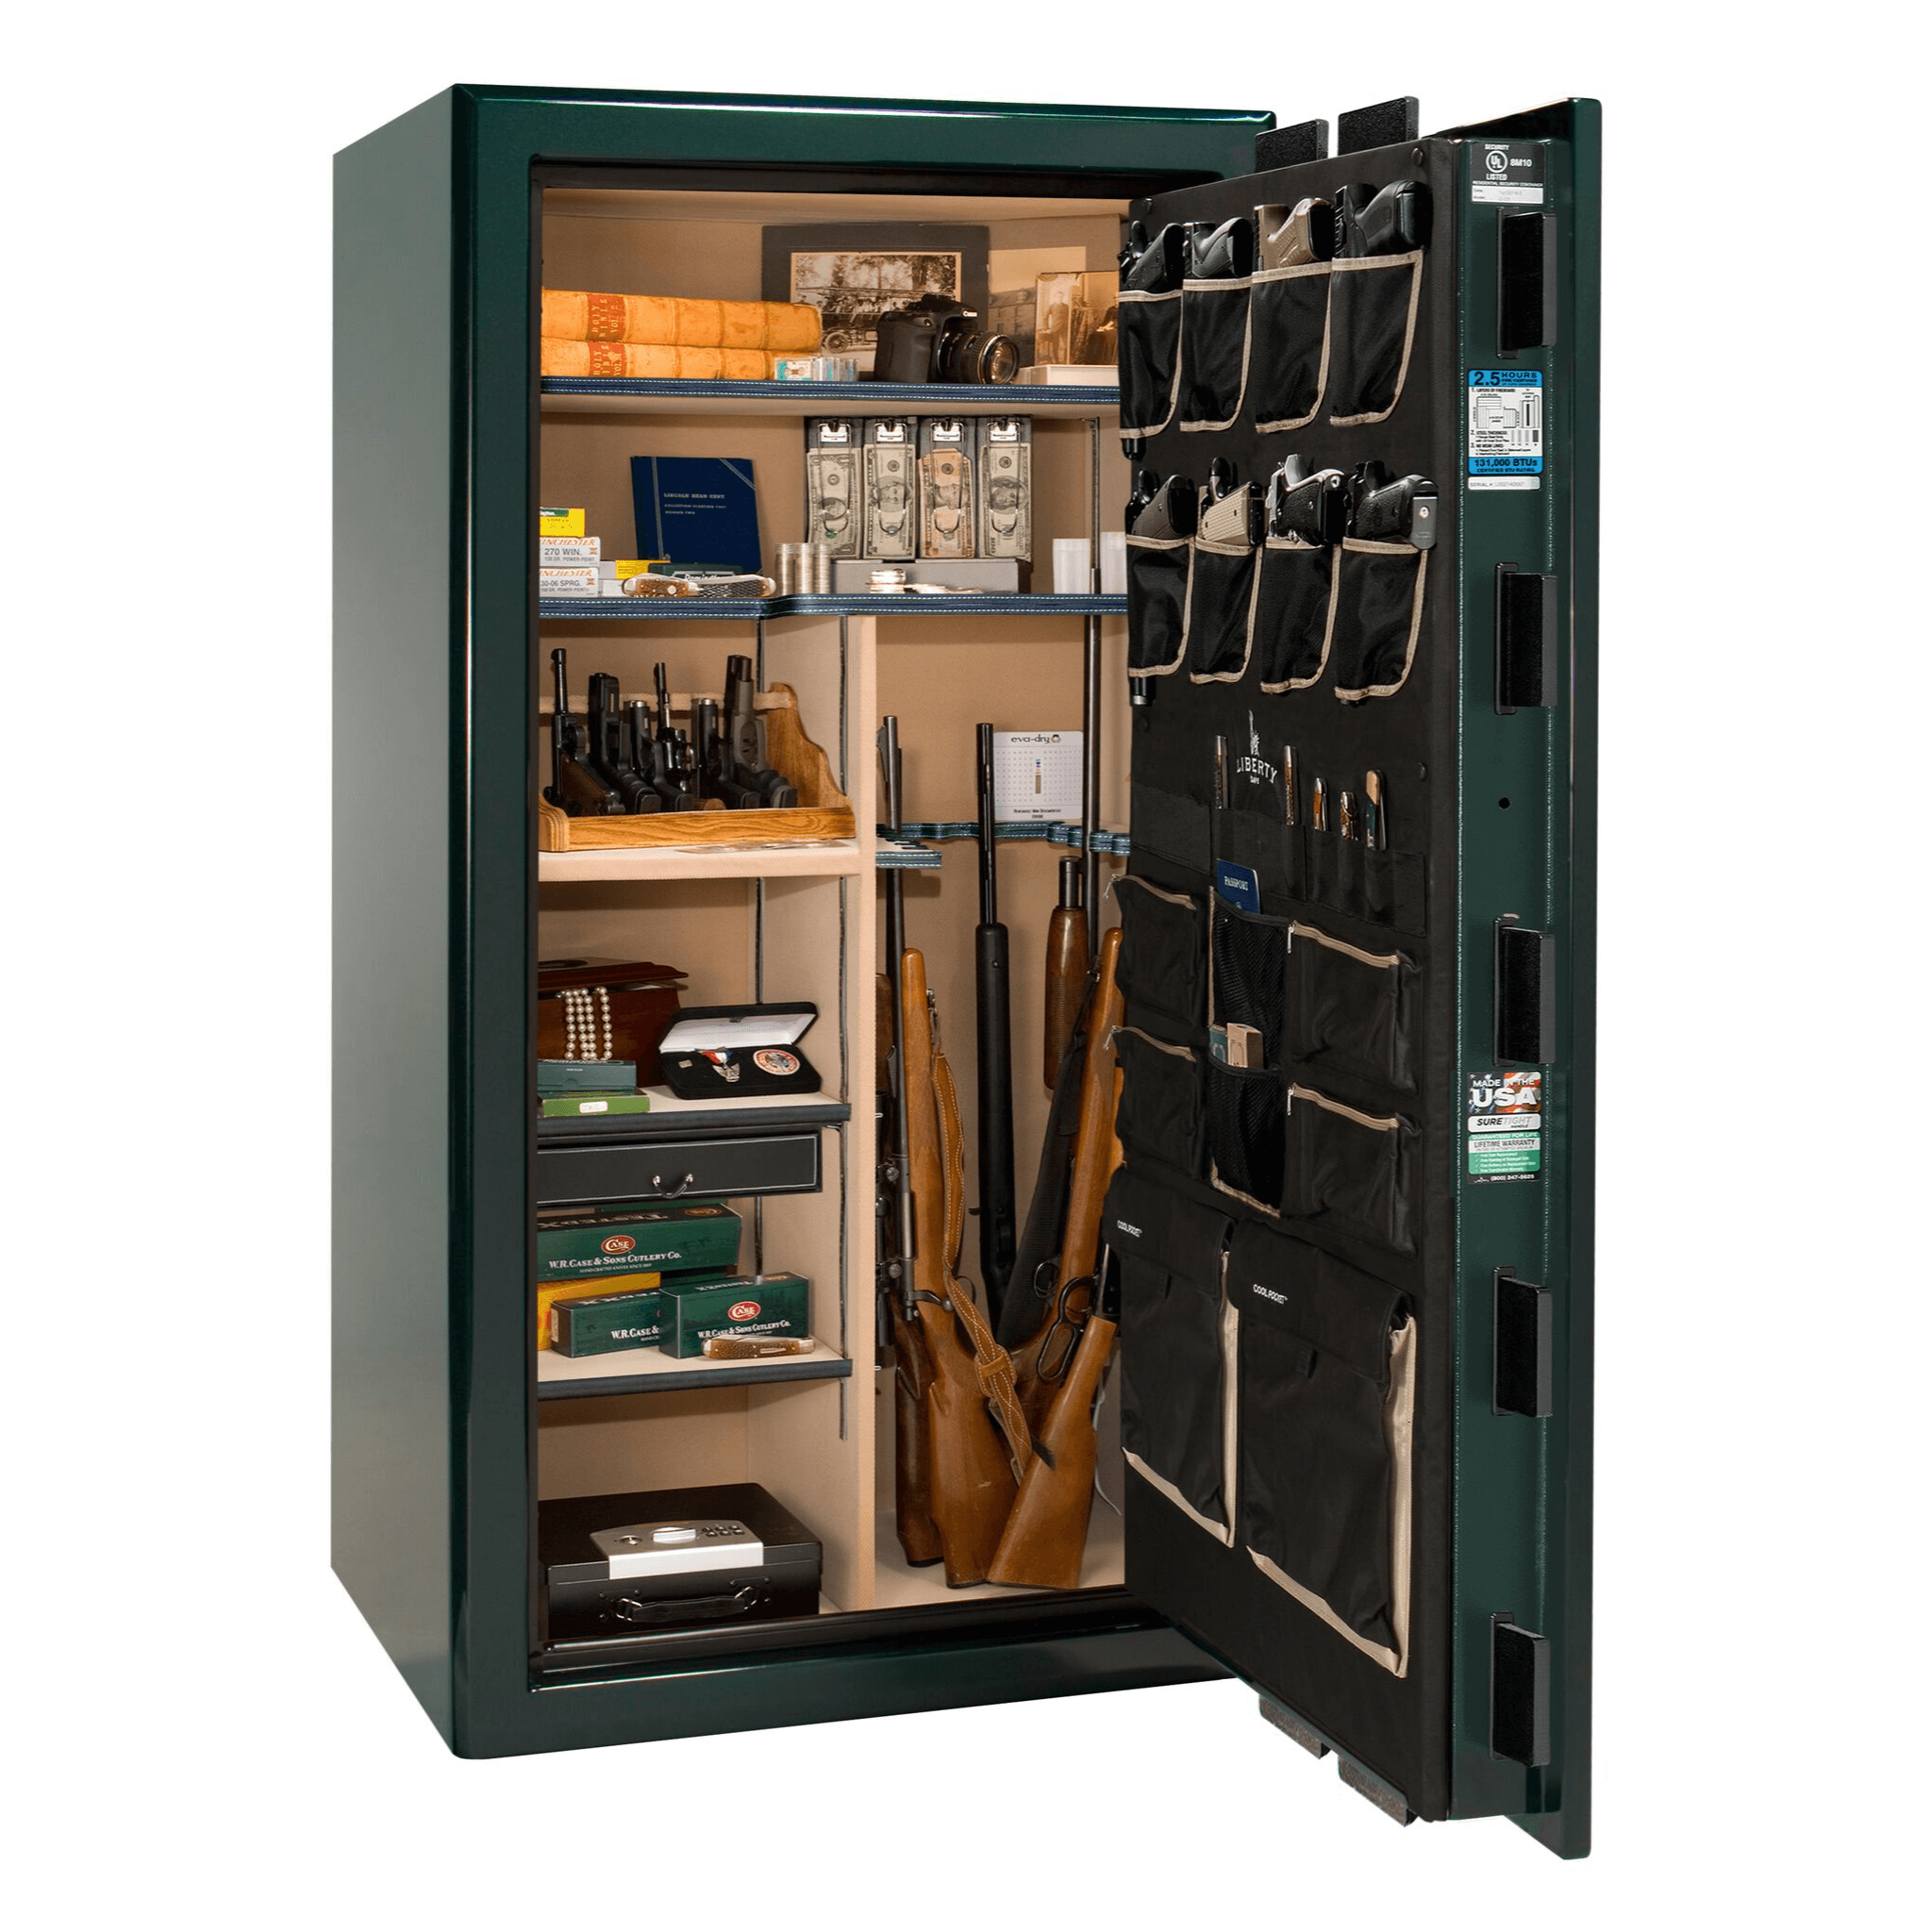 Presidential Series | Level 8 Security | 2.5 Hours Fire Protection | 40 | Dimensions: 66.5"(H) x 36.25"(W) x 32"(D) | Green Gloss | Gold Hardware | Electronic Lock